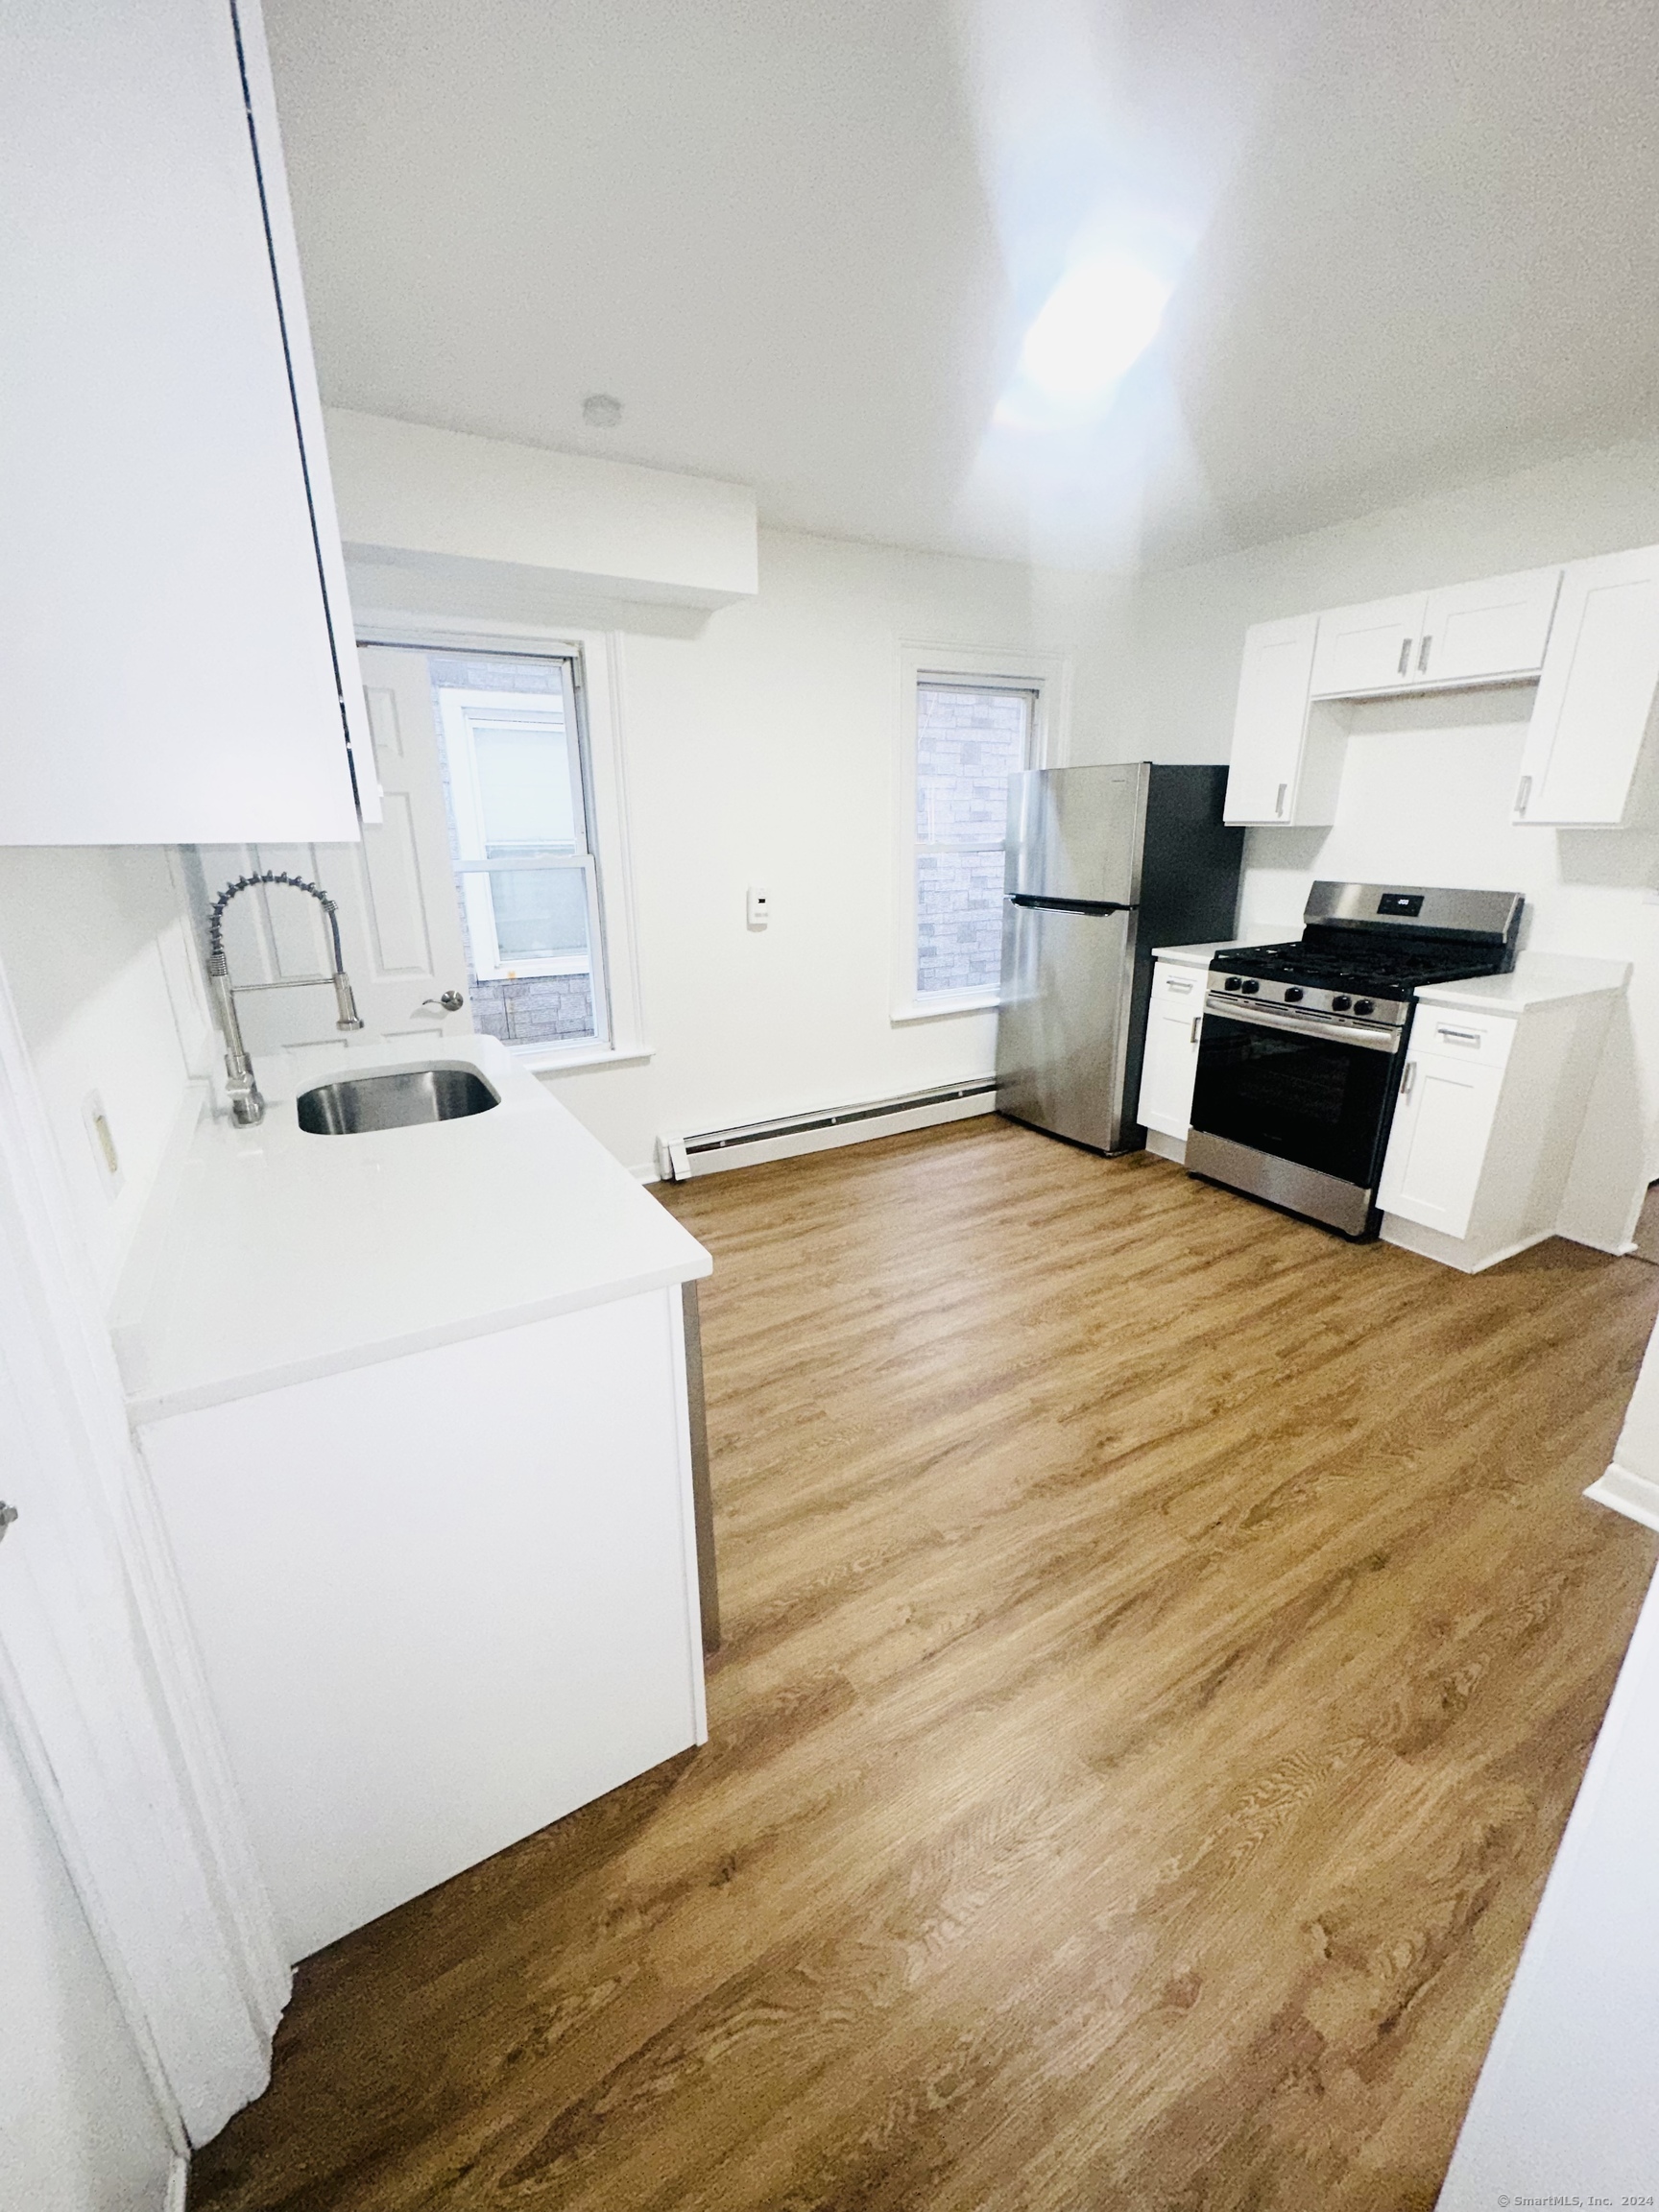 a kitchen with stainless steel appliances kitchen island a stove a refrigerator a sink and white cabinets with wooden floor